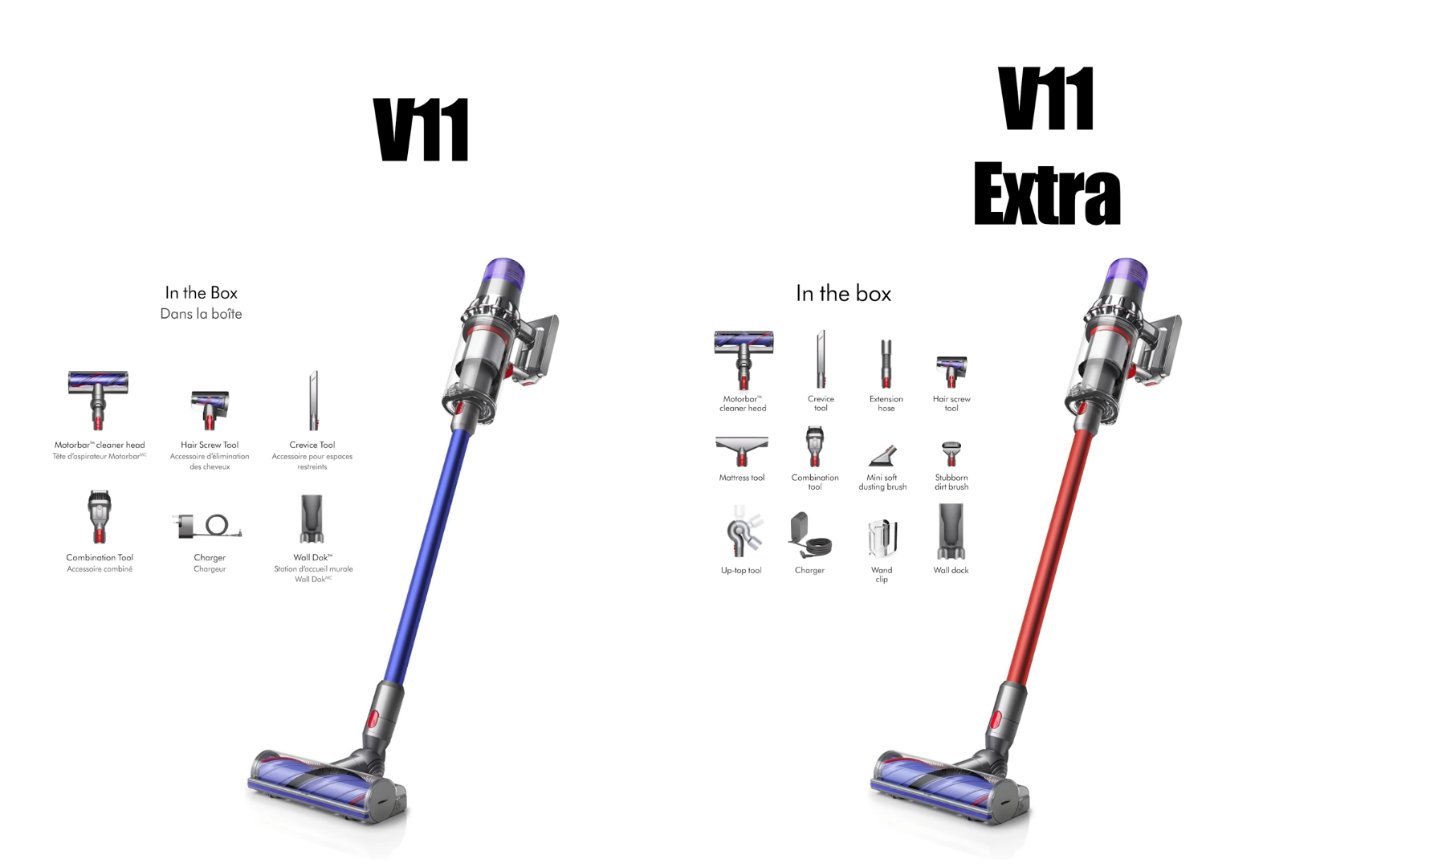 An image showing the Dyson V11 in blue and V11 Extra in red, each with list of accessories